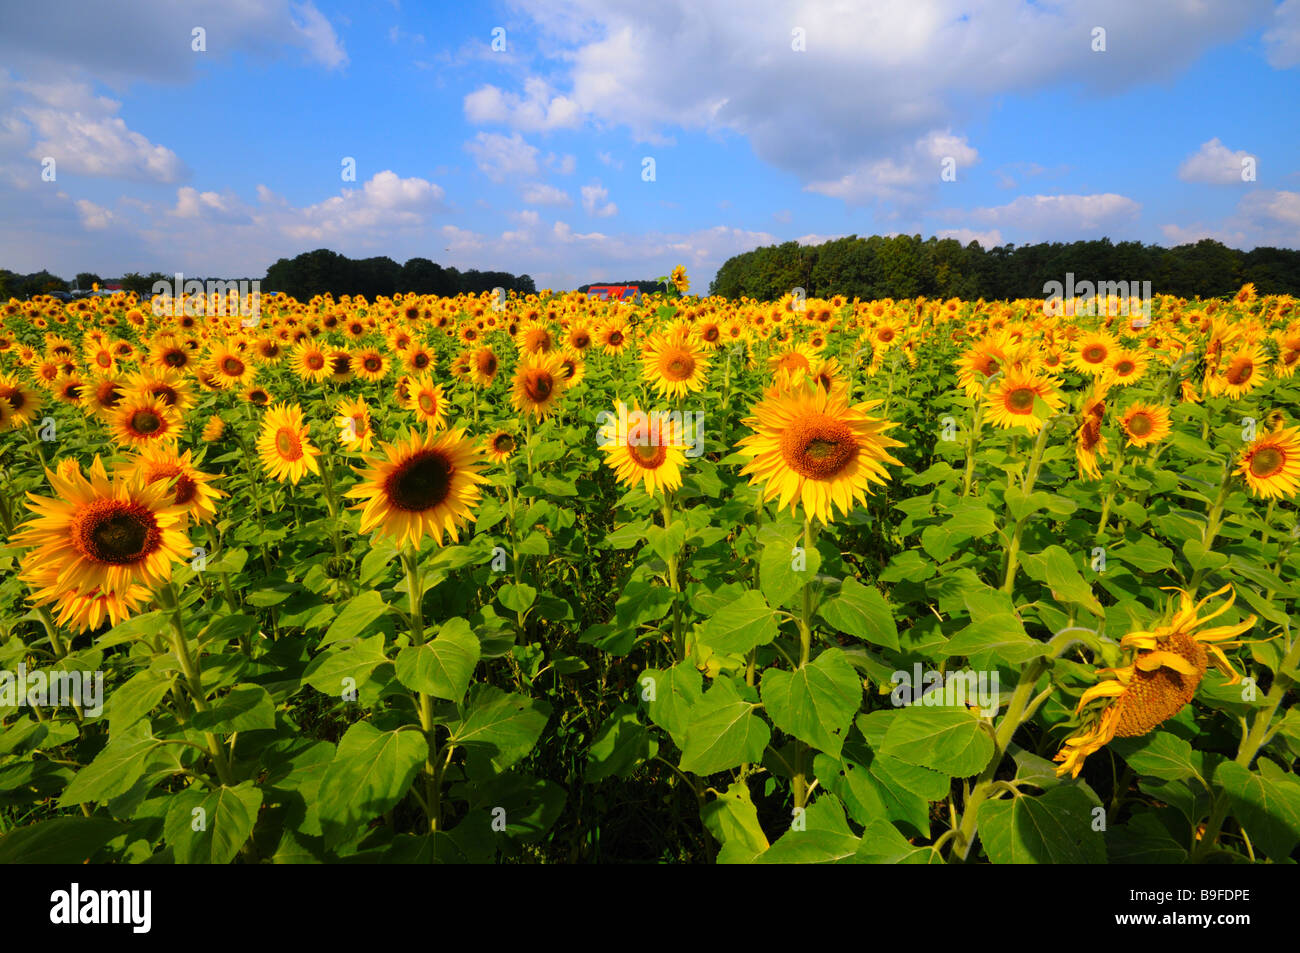 Le tournesol (Helianthus annus) blooming in field Banque D'Images